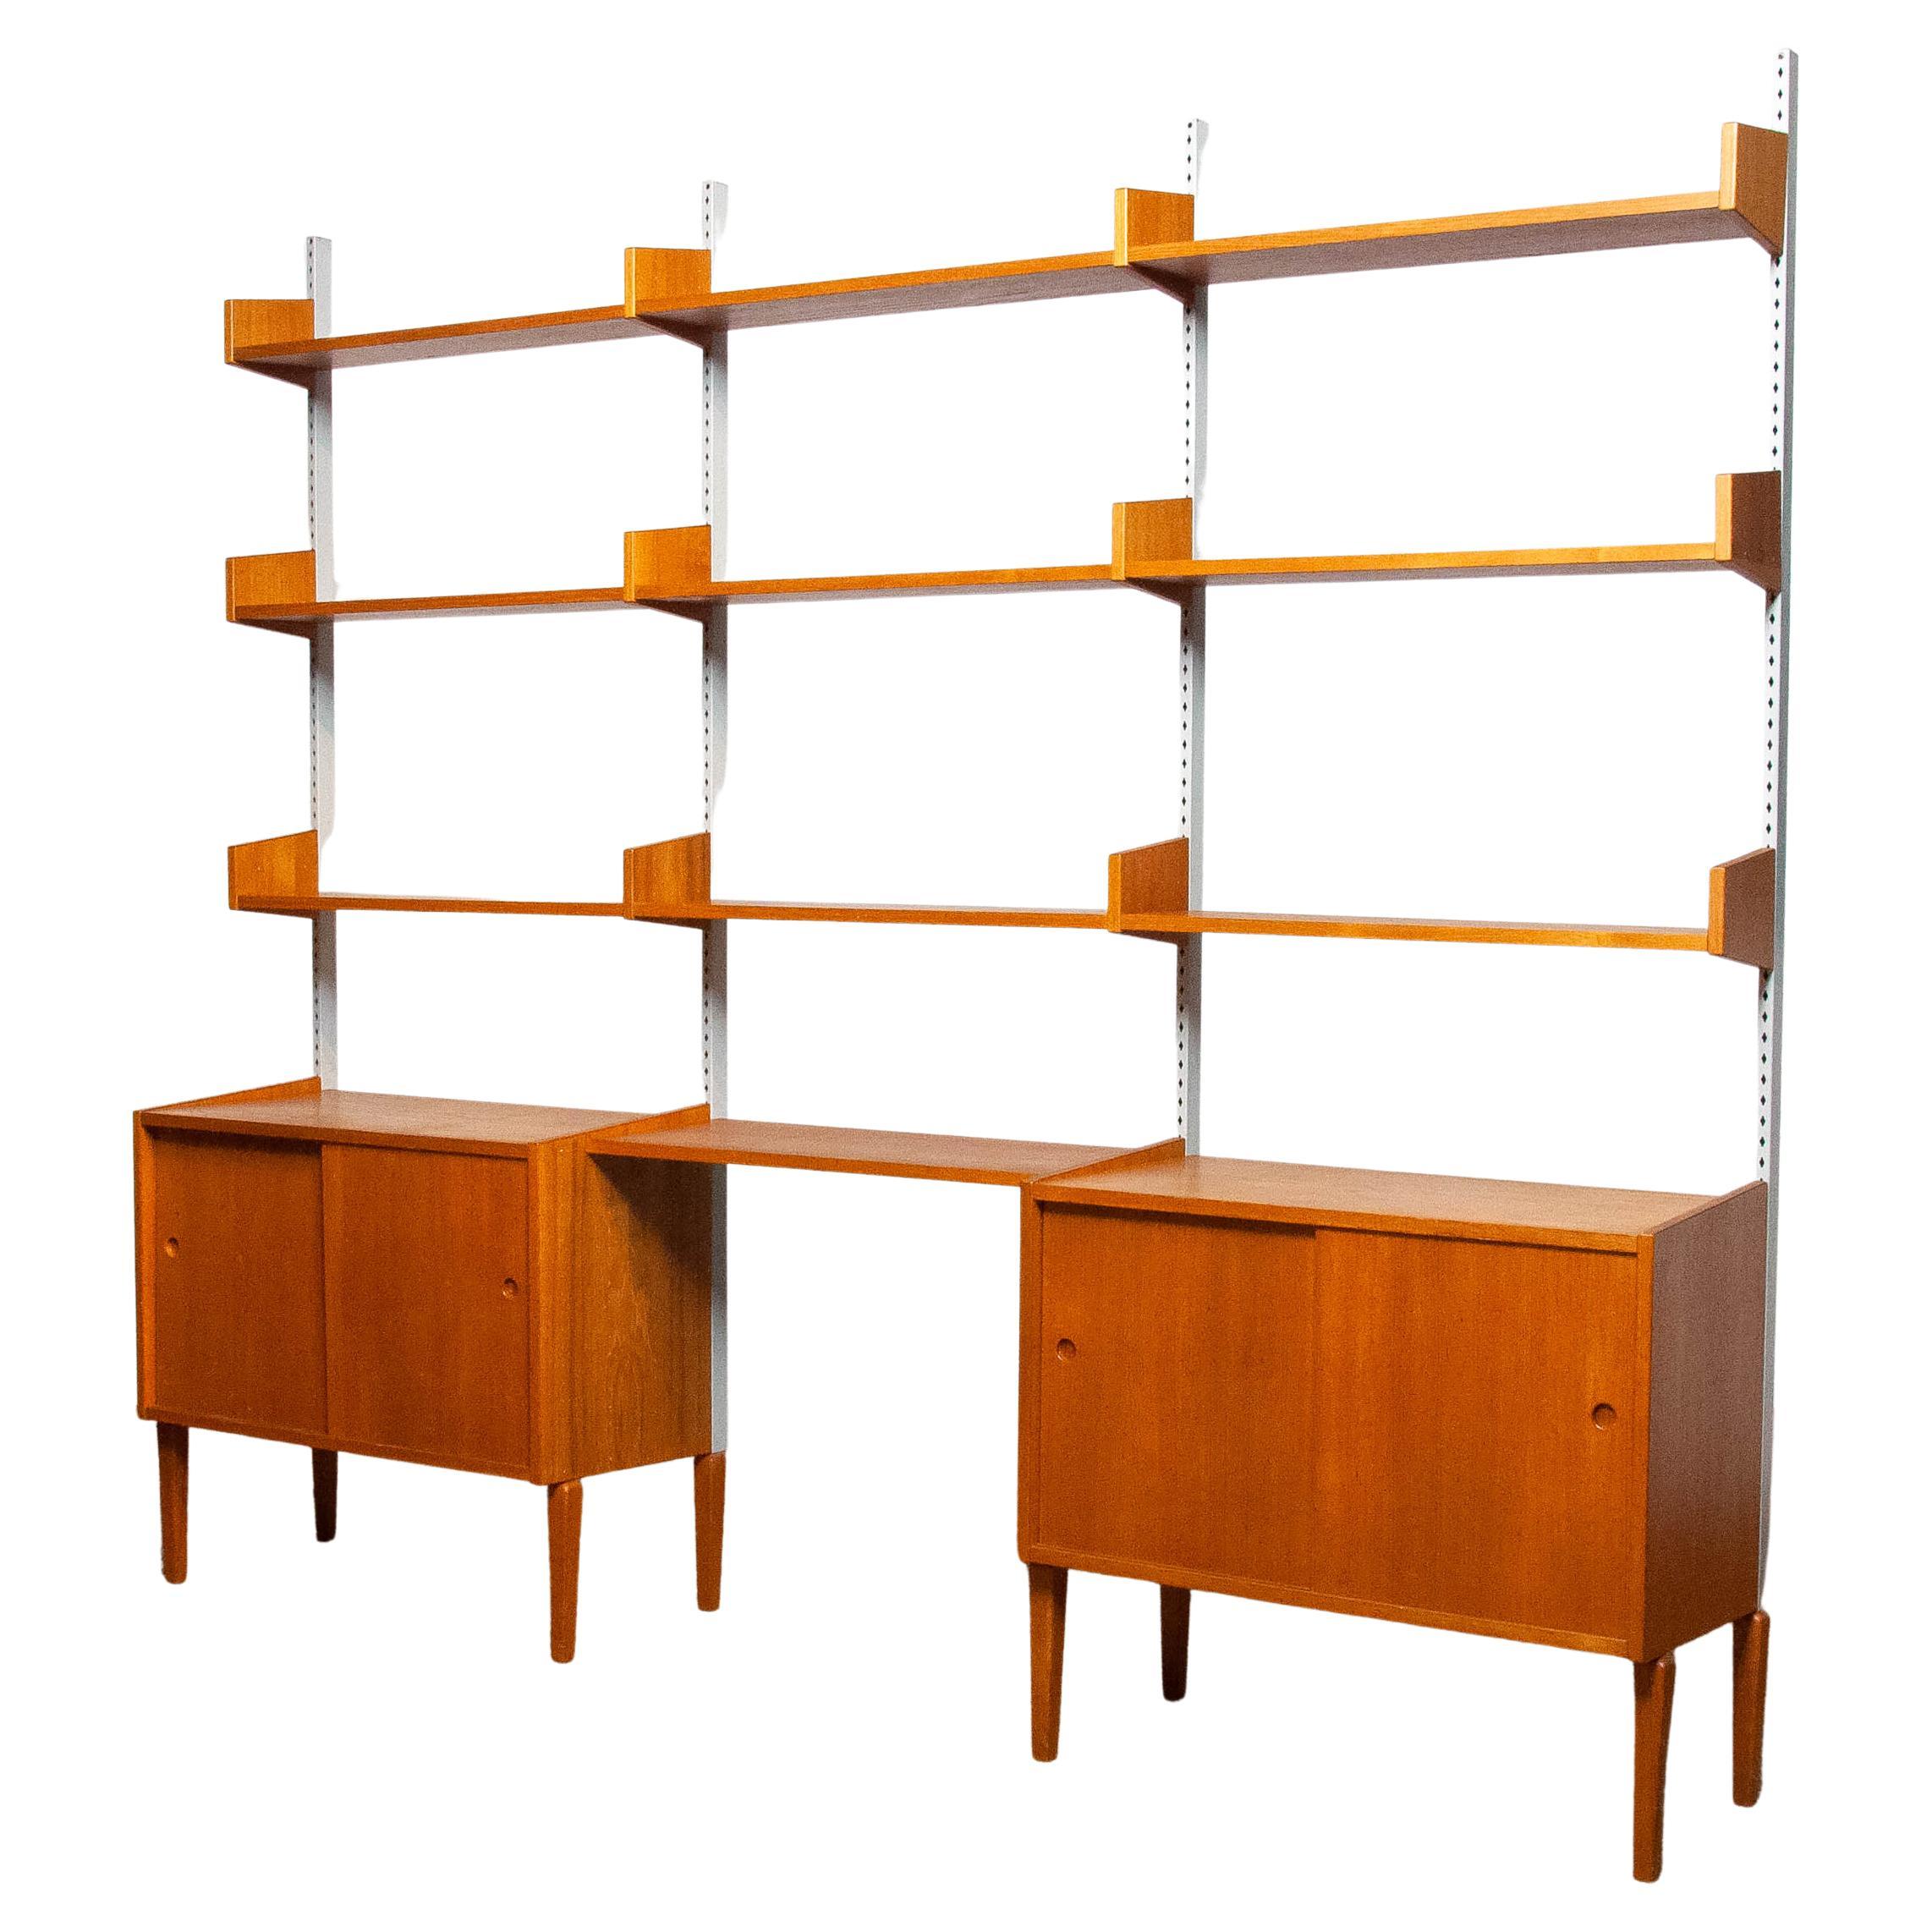 Teak Modulair Shelf System / Bookcase with Steel Bars by Harald Lundqvist 1950